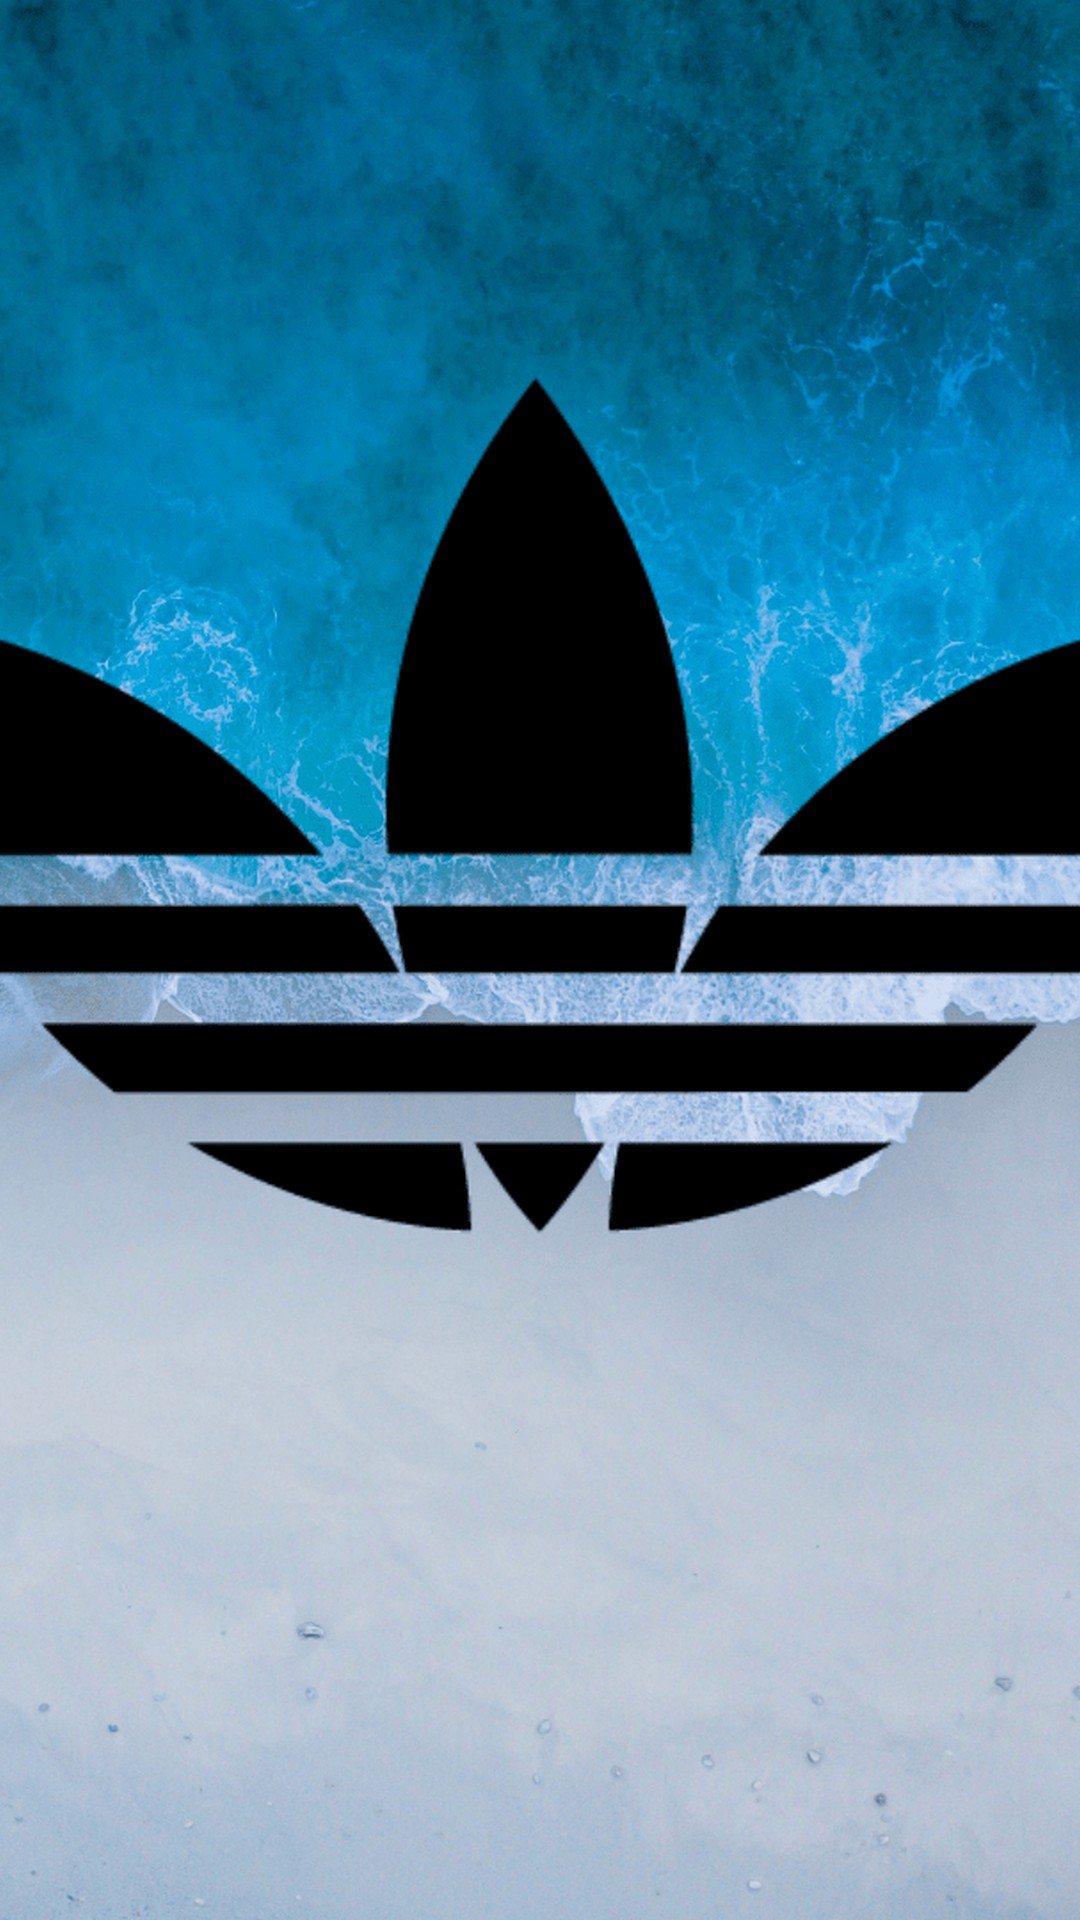 Logo Adidas iPhone Wallpaper in HD With high-resolution 1080X1920 pixel. You can set as wallpaper for Apple iPhone X, XS Max, XR, 8, 7, 6, SE, iPad. Enjoy and share your favorite HD wallpapers and background images